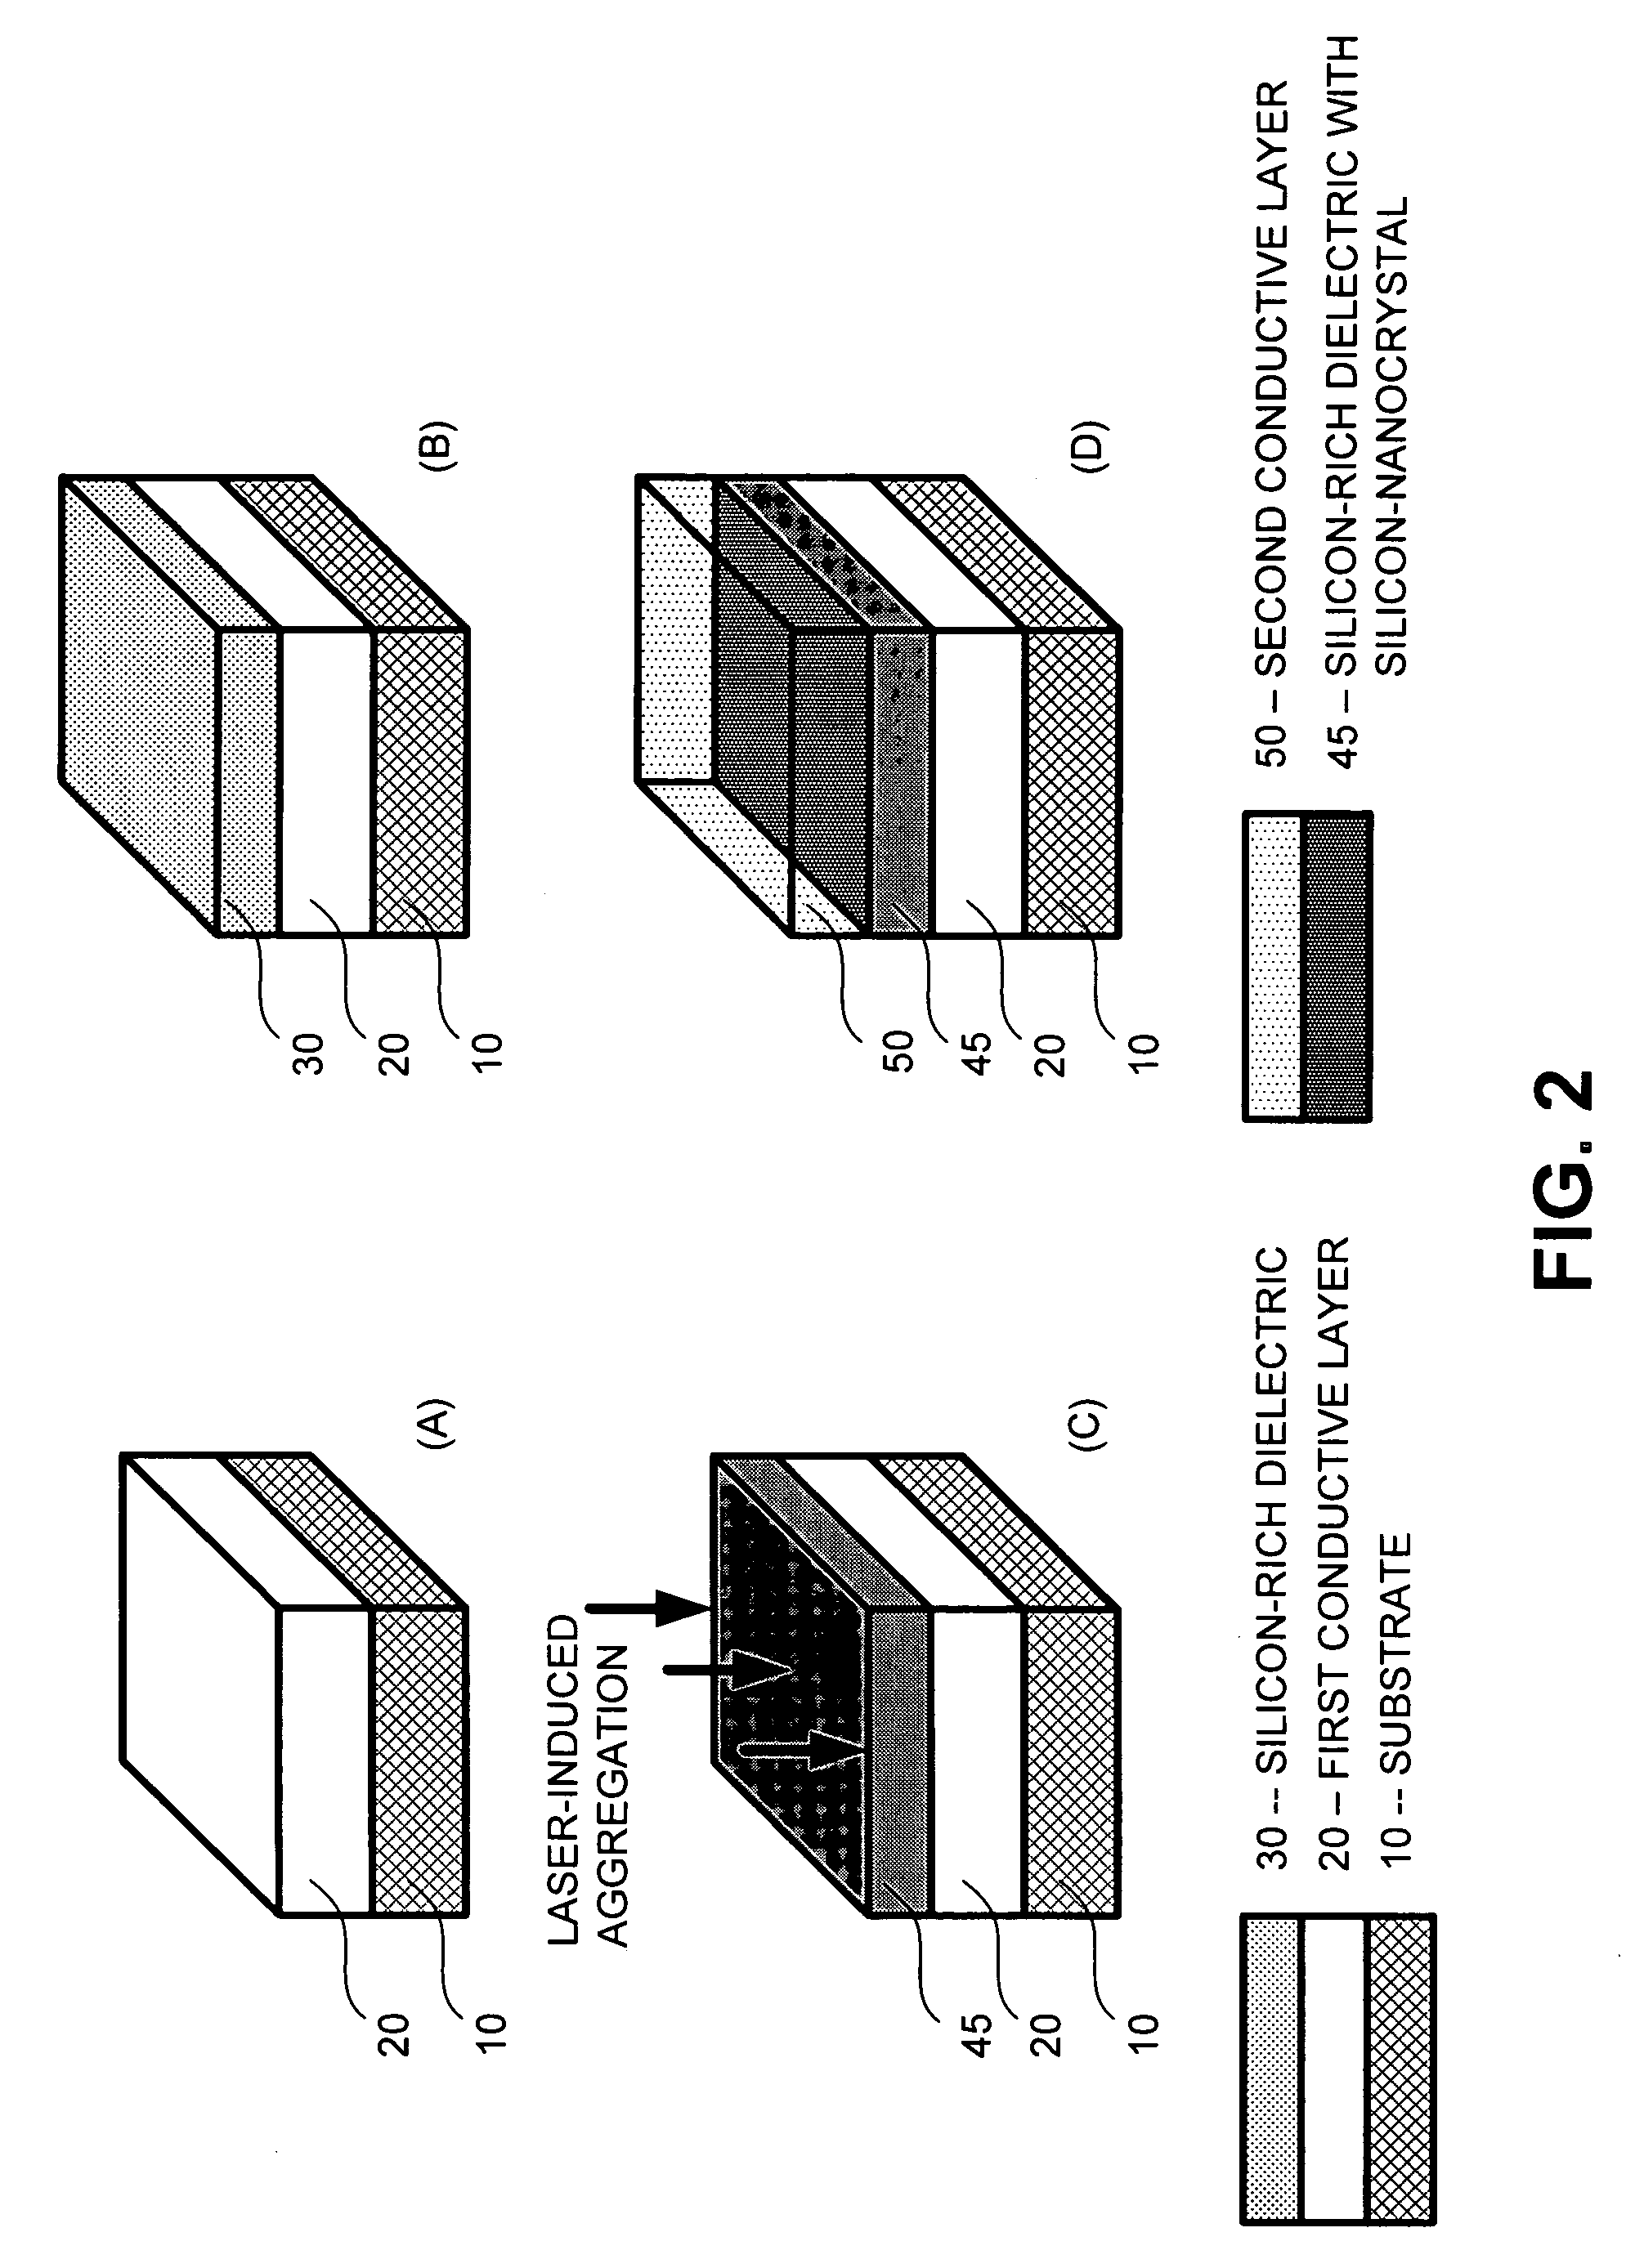 Methods of forming silicon nanocrystals by laser annealing